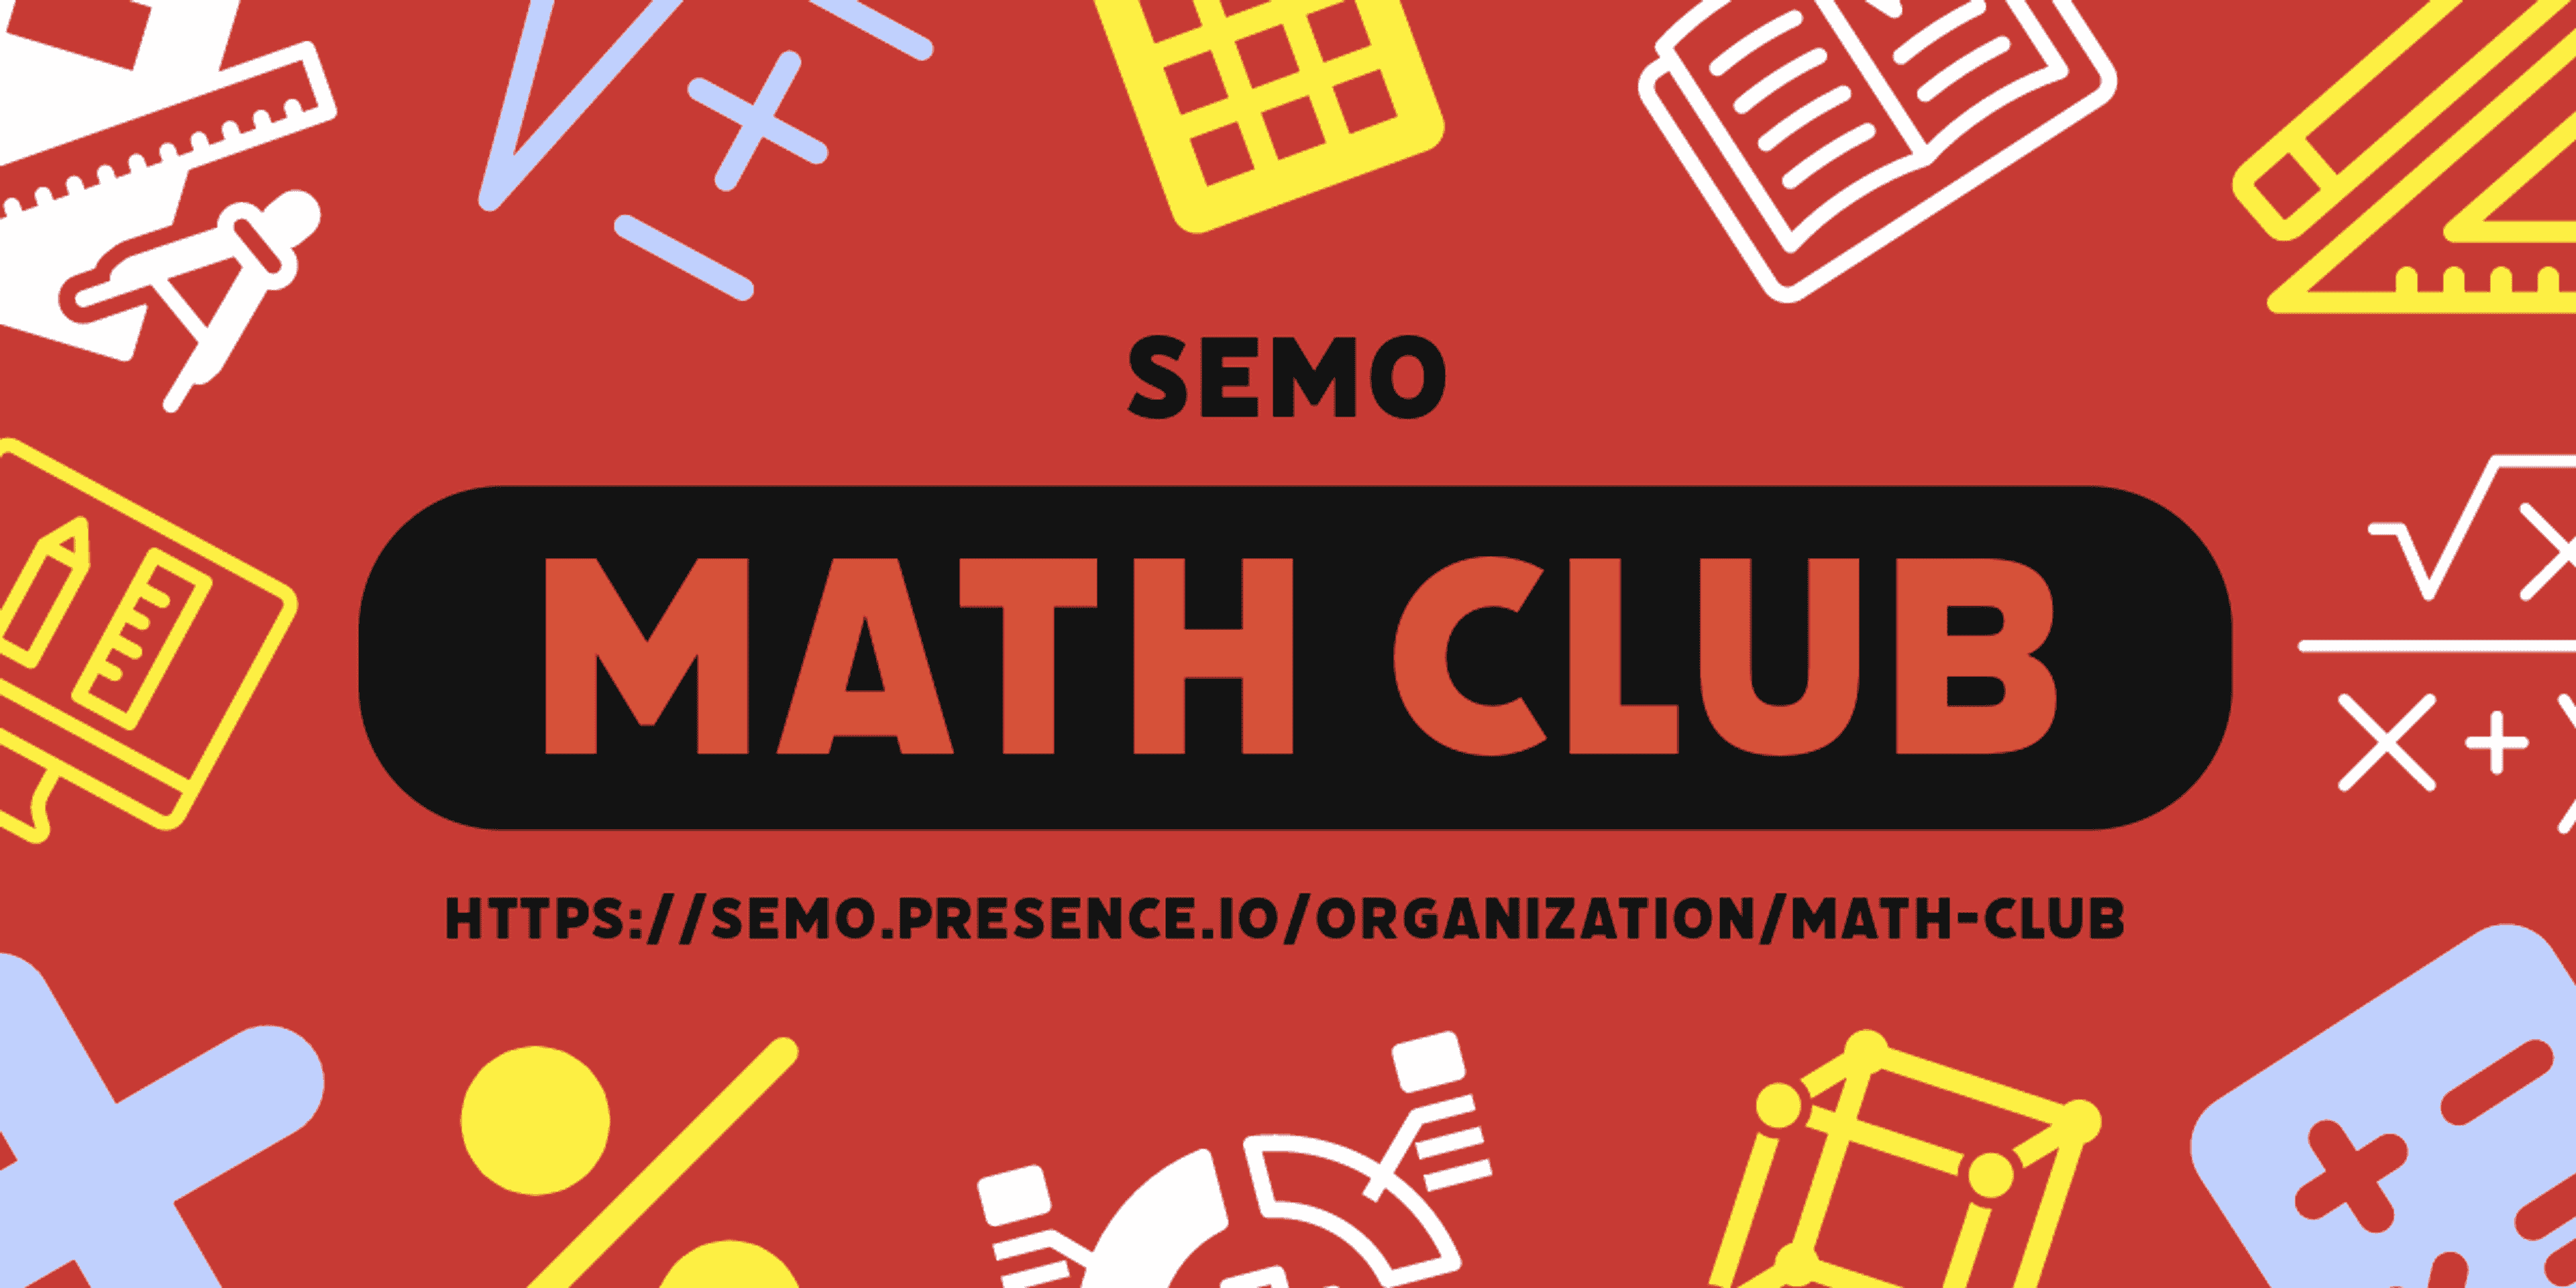 Students find community in the SEMO Math Club